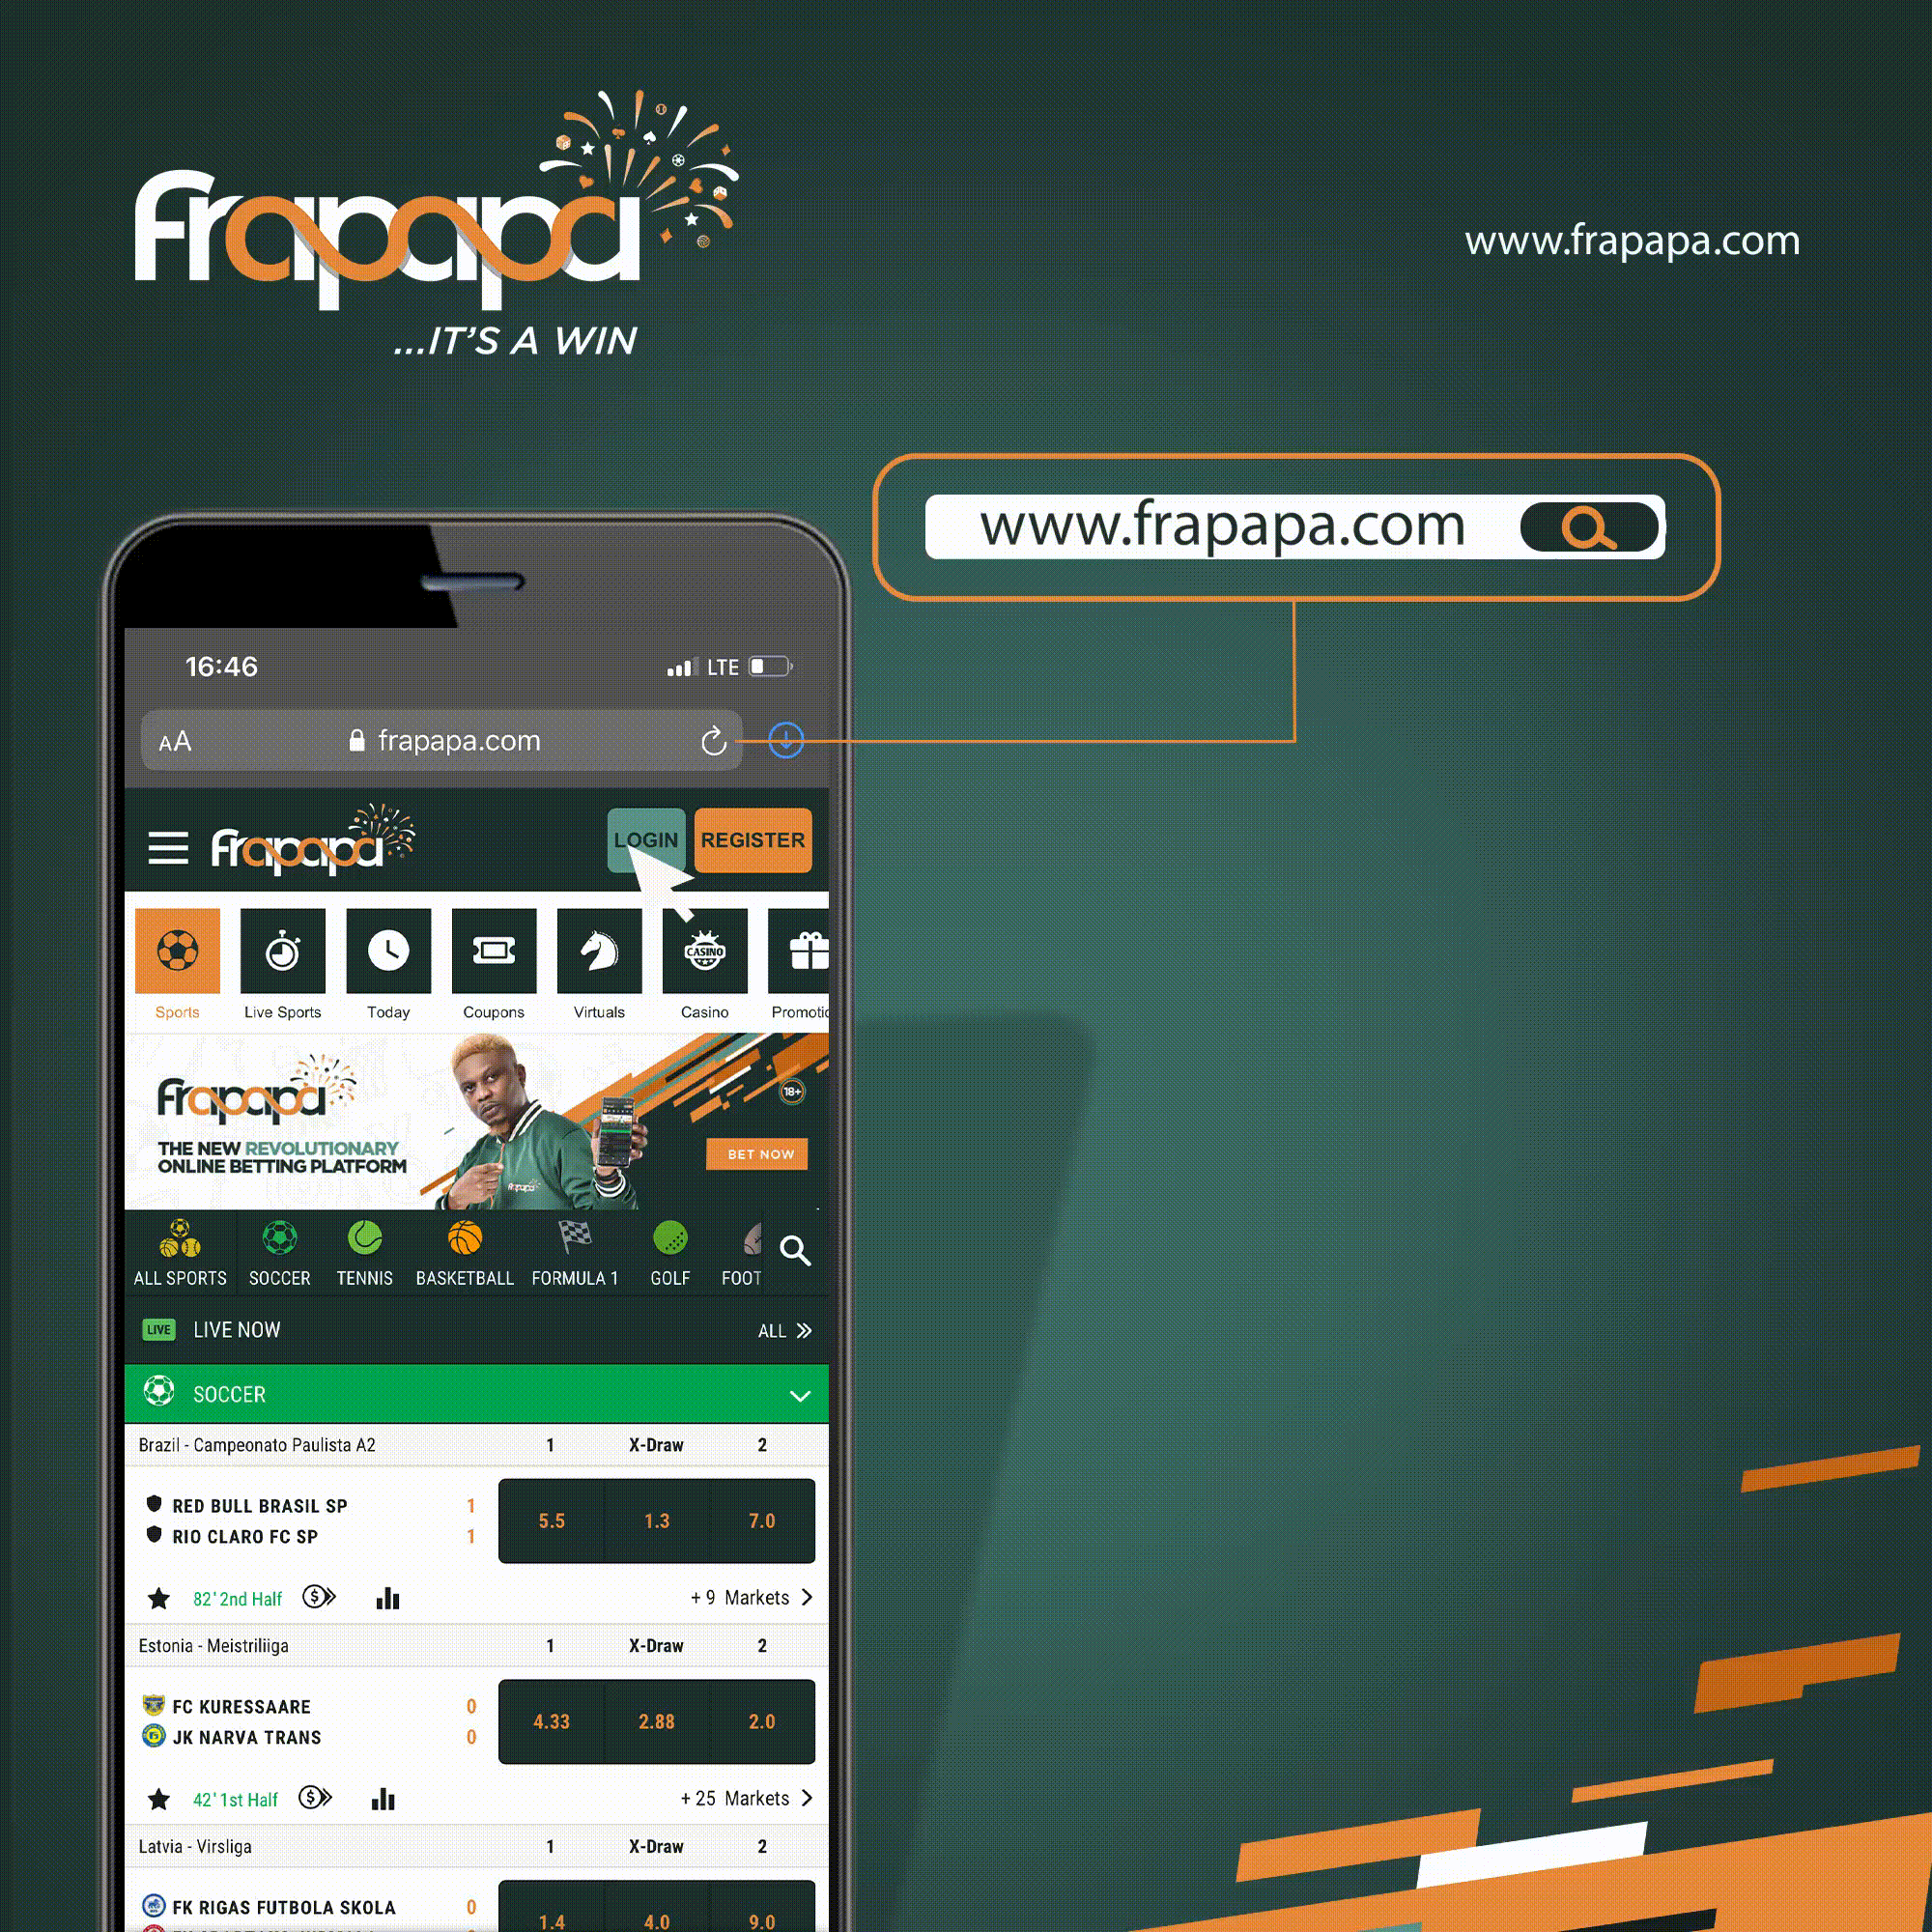 A gif image on how to add bank account details to a Frapapa account.